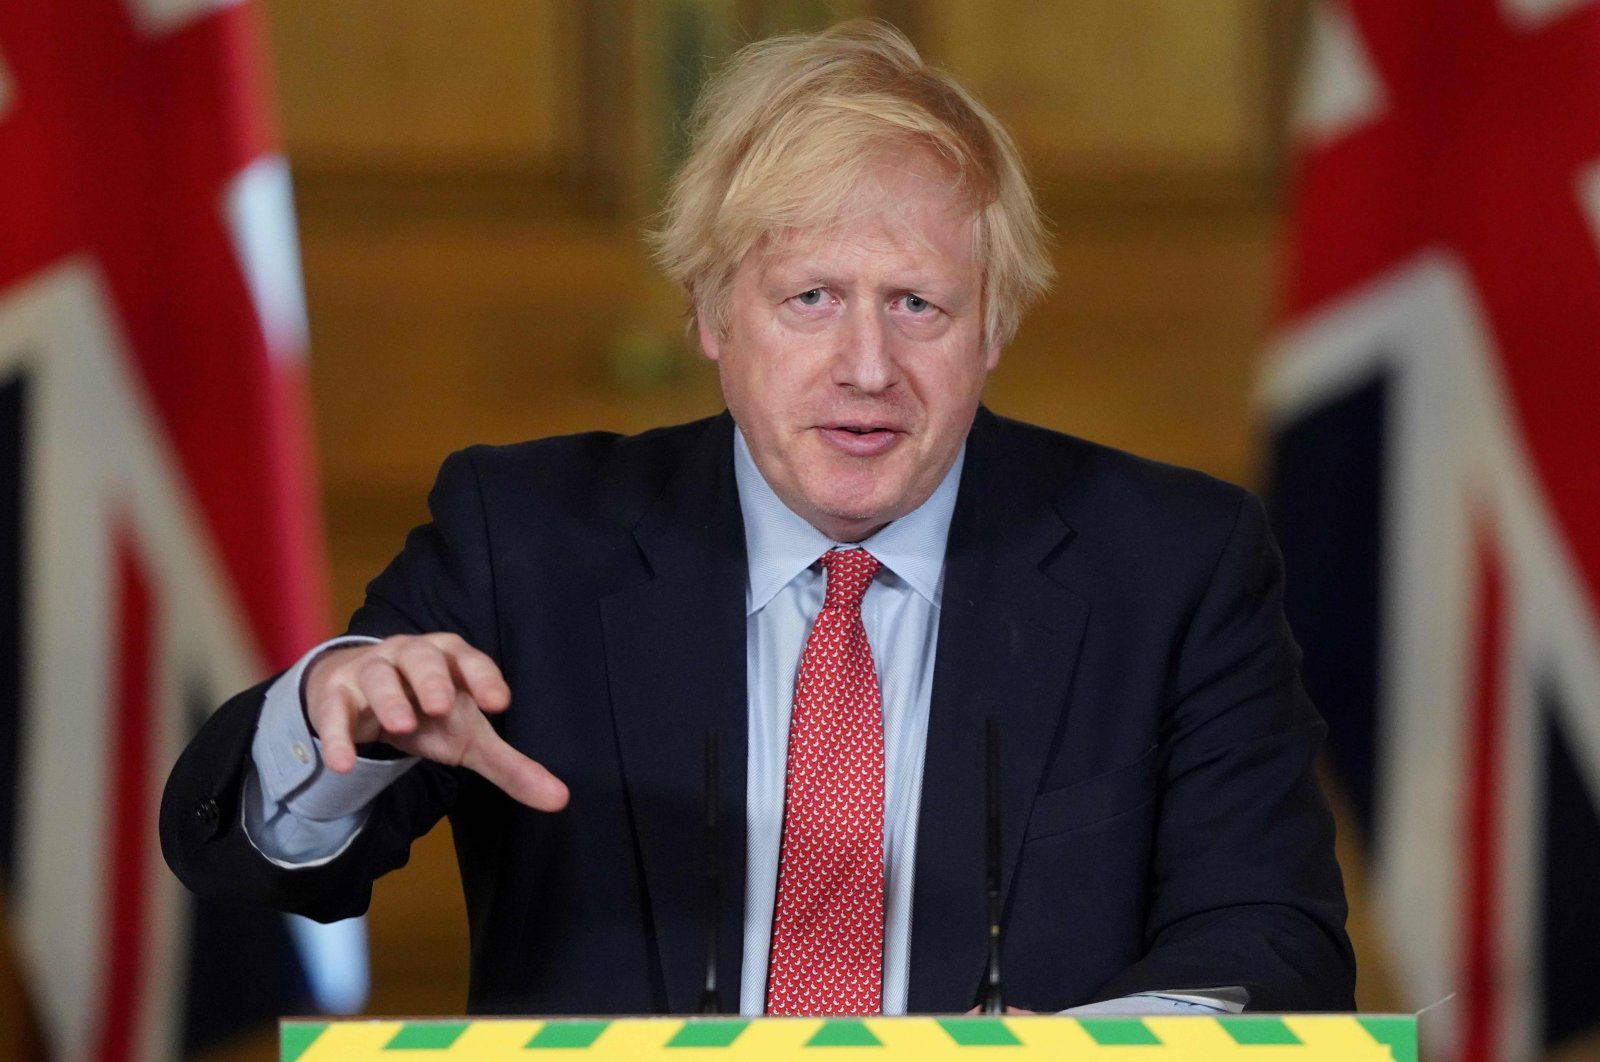 A handout image released by 10 Downing Street, shows Britain's Prime Minister Boris Johnson speaking at a remote press conference to update the nation on the COVID-19 pandemic, inside 10 Downing Street in central London on May 28, 2020. (AFP Photo)